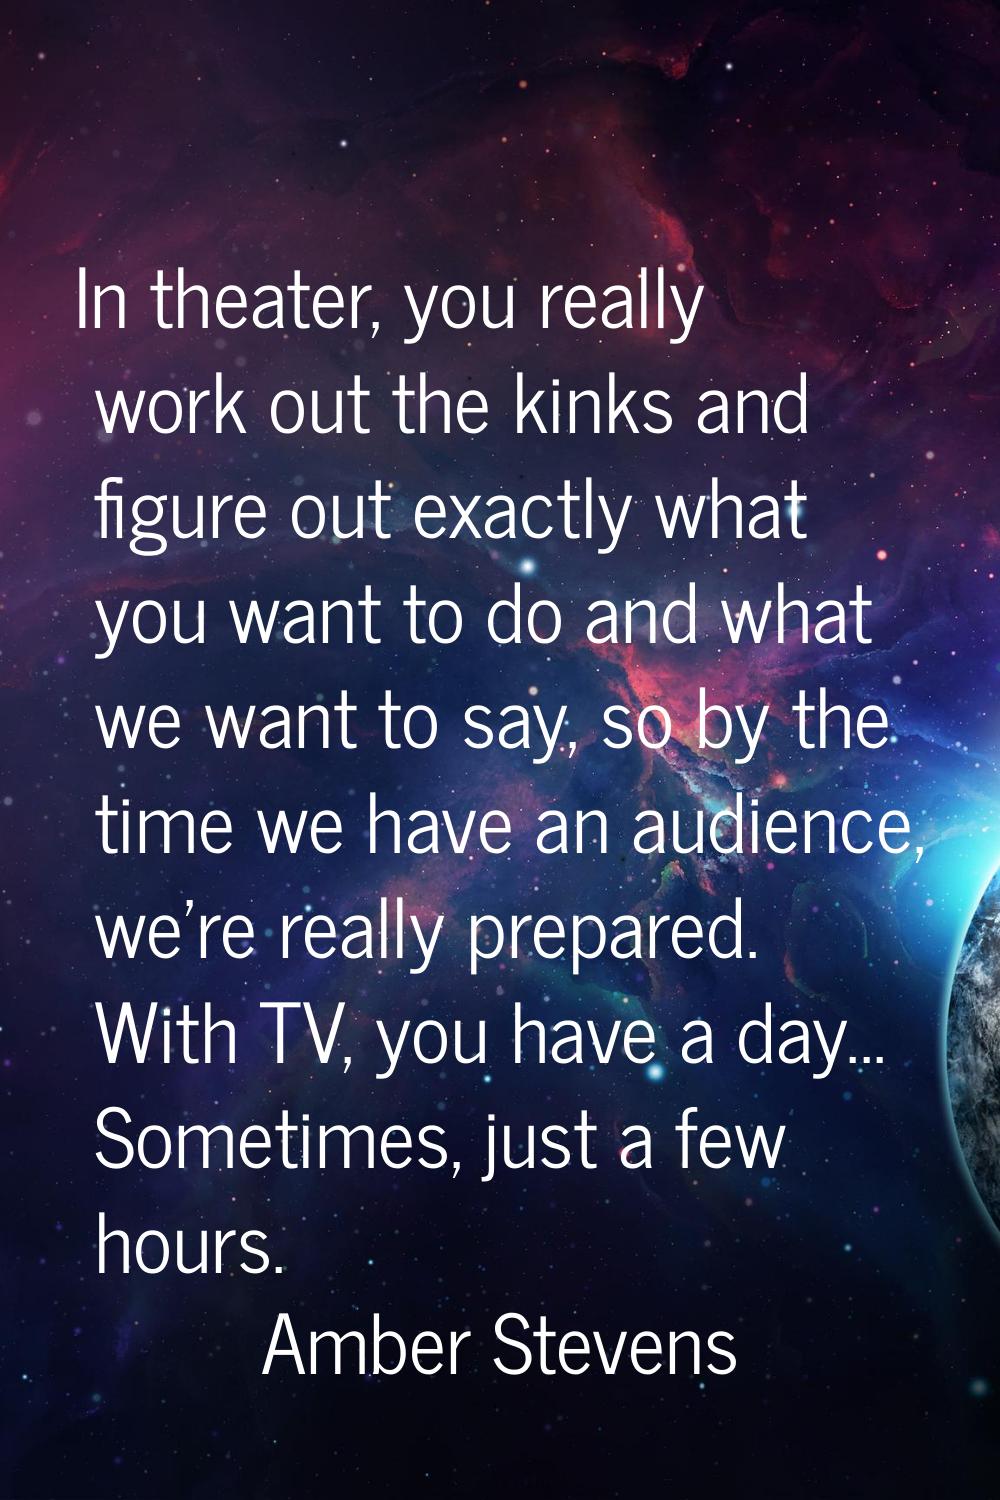 In theater, you really work out the kinks and figure out exactly what you want to do and what we wa